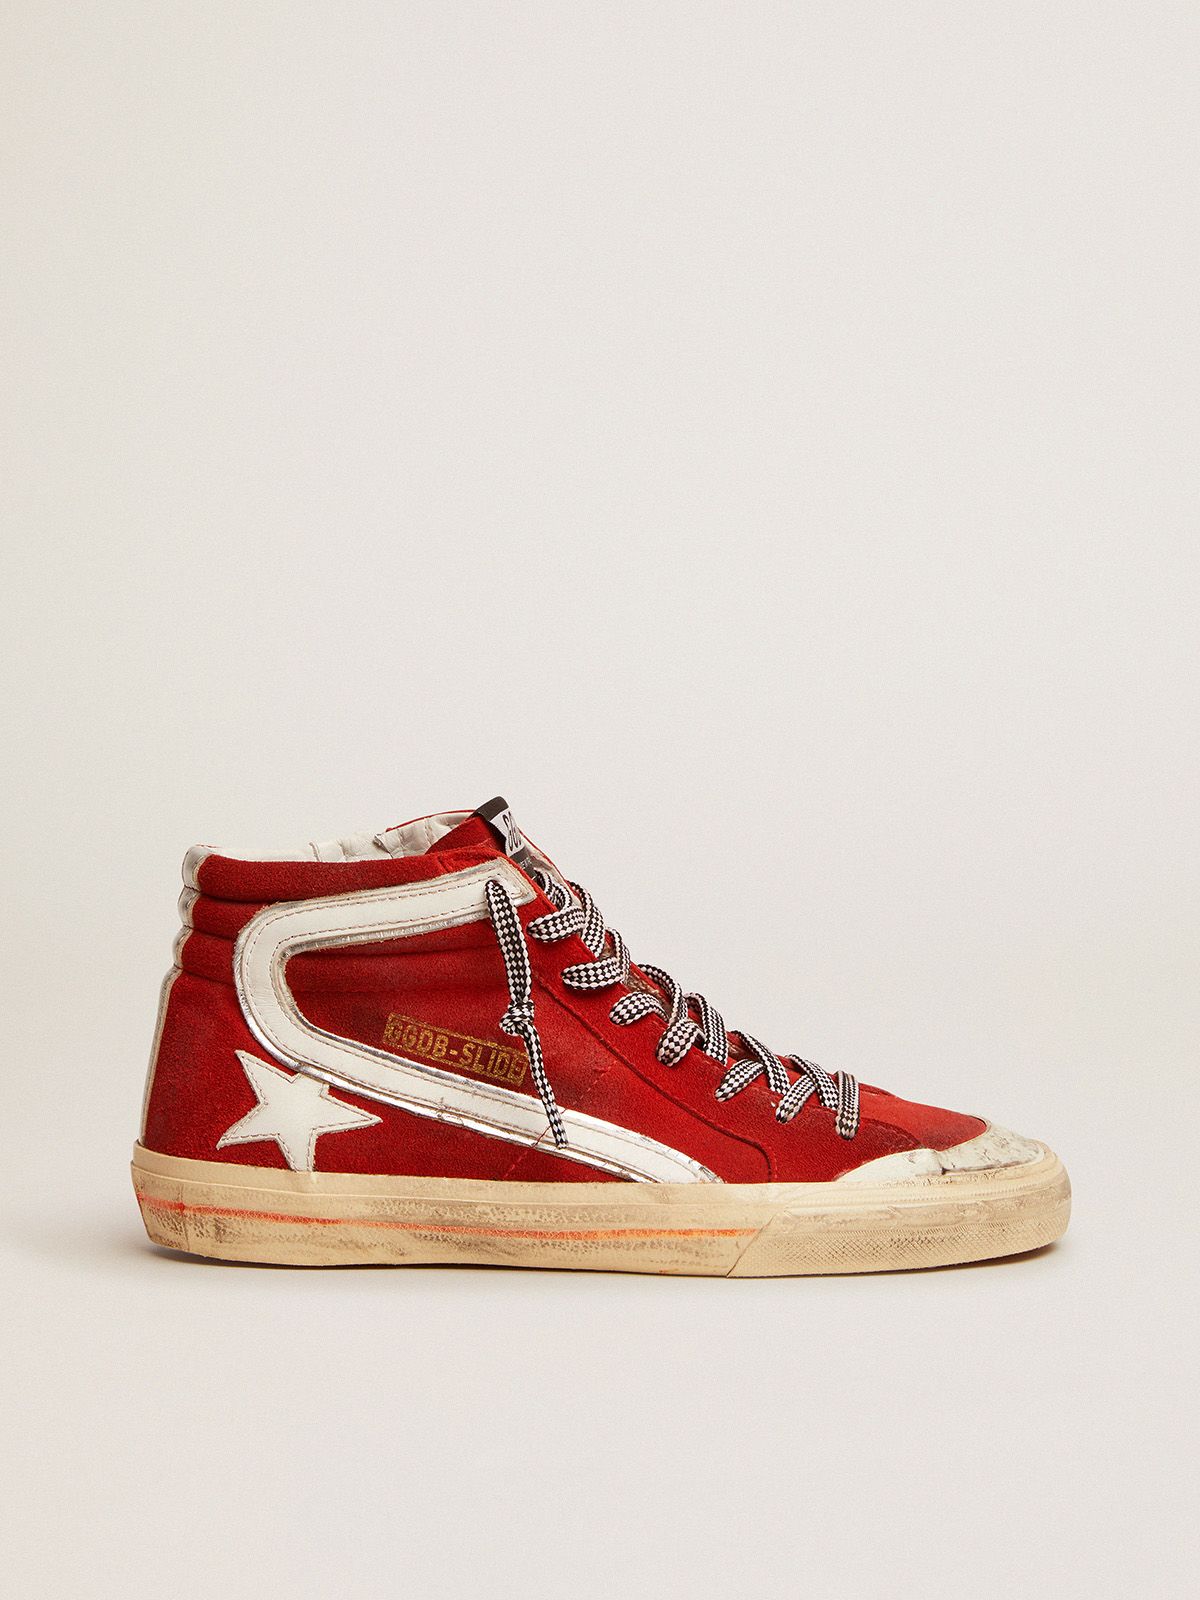 golden goose in white Slide sneakers red details with suede Penstar